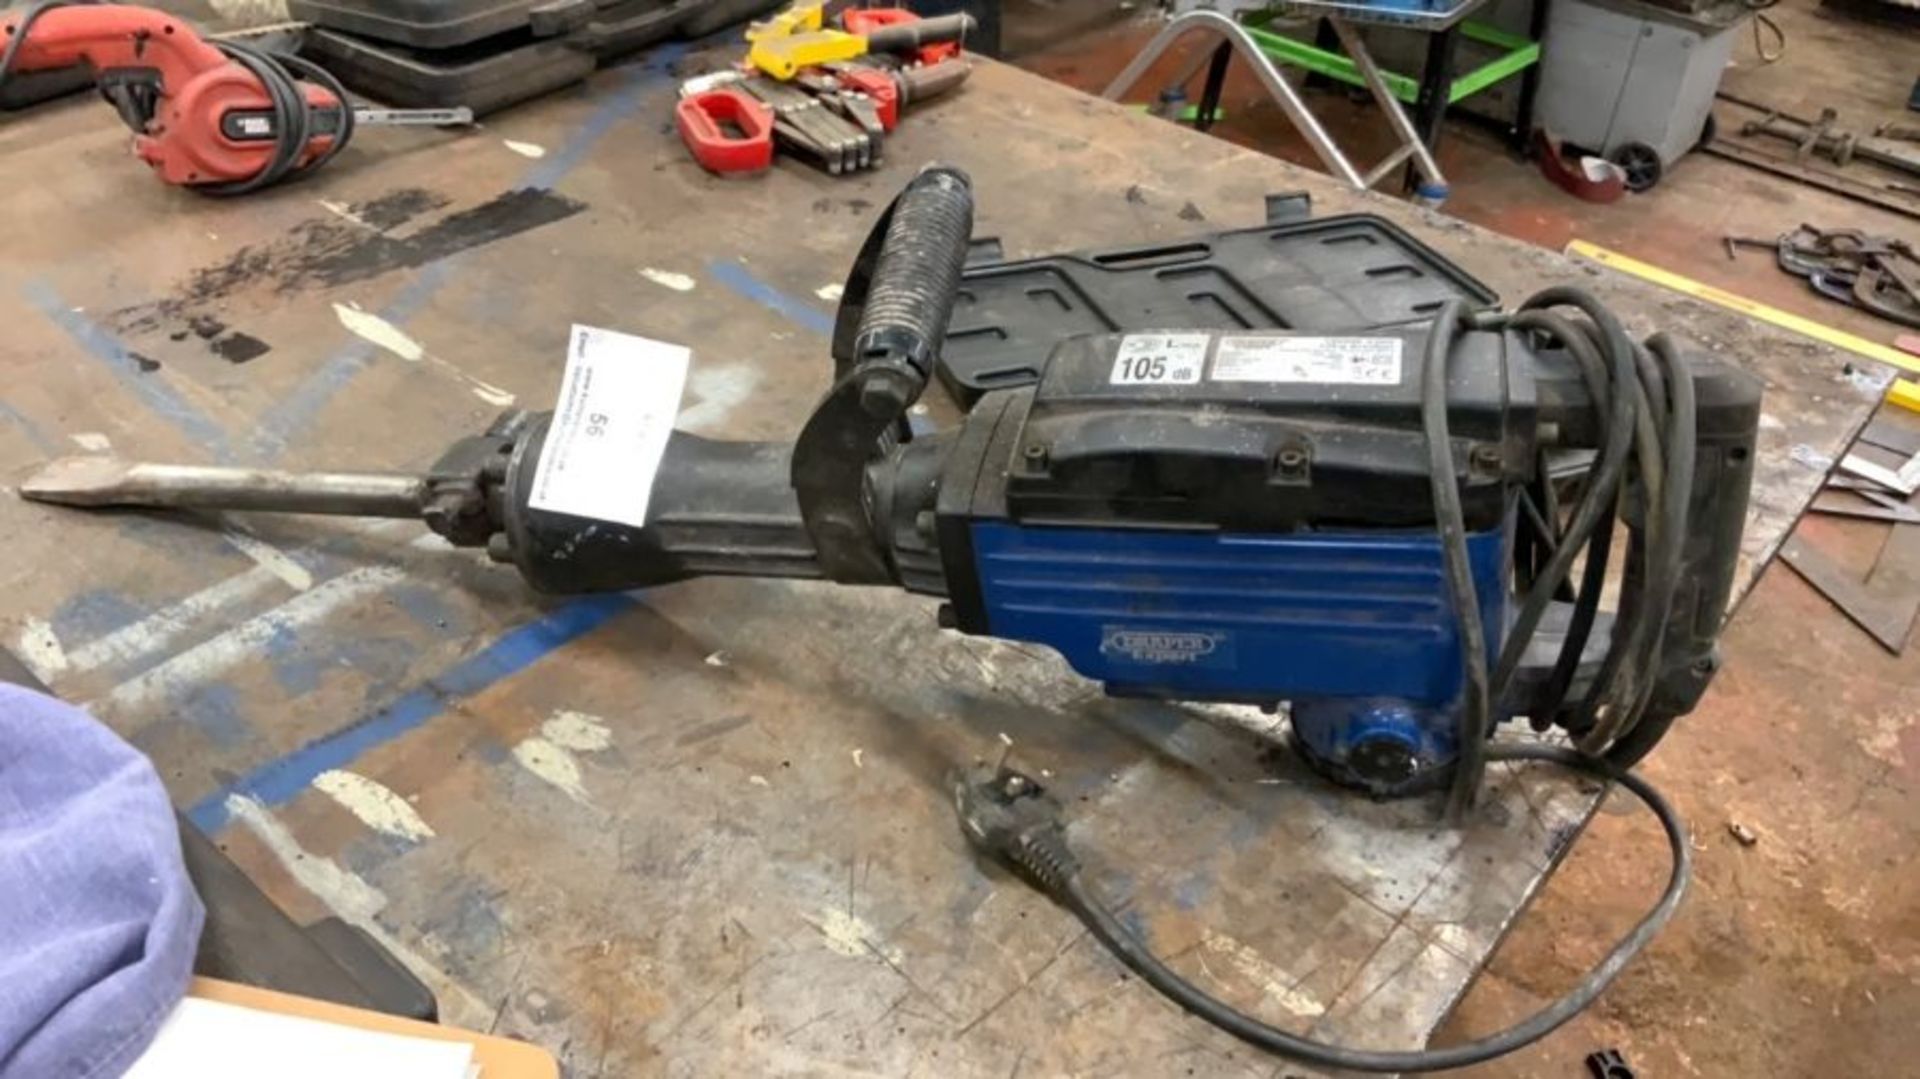 Draper Expert 1600w 230v, 15kg Breaker, Serial No.16110540 with two attachments - Image 2 of 10